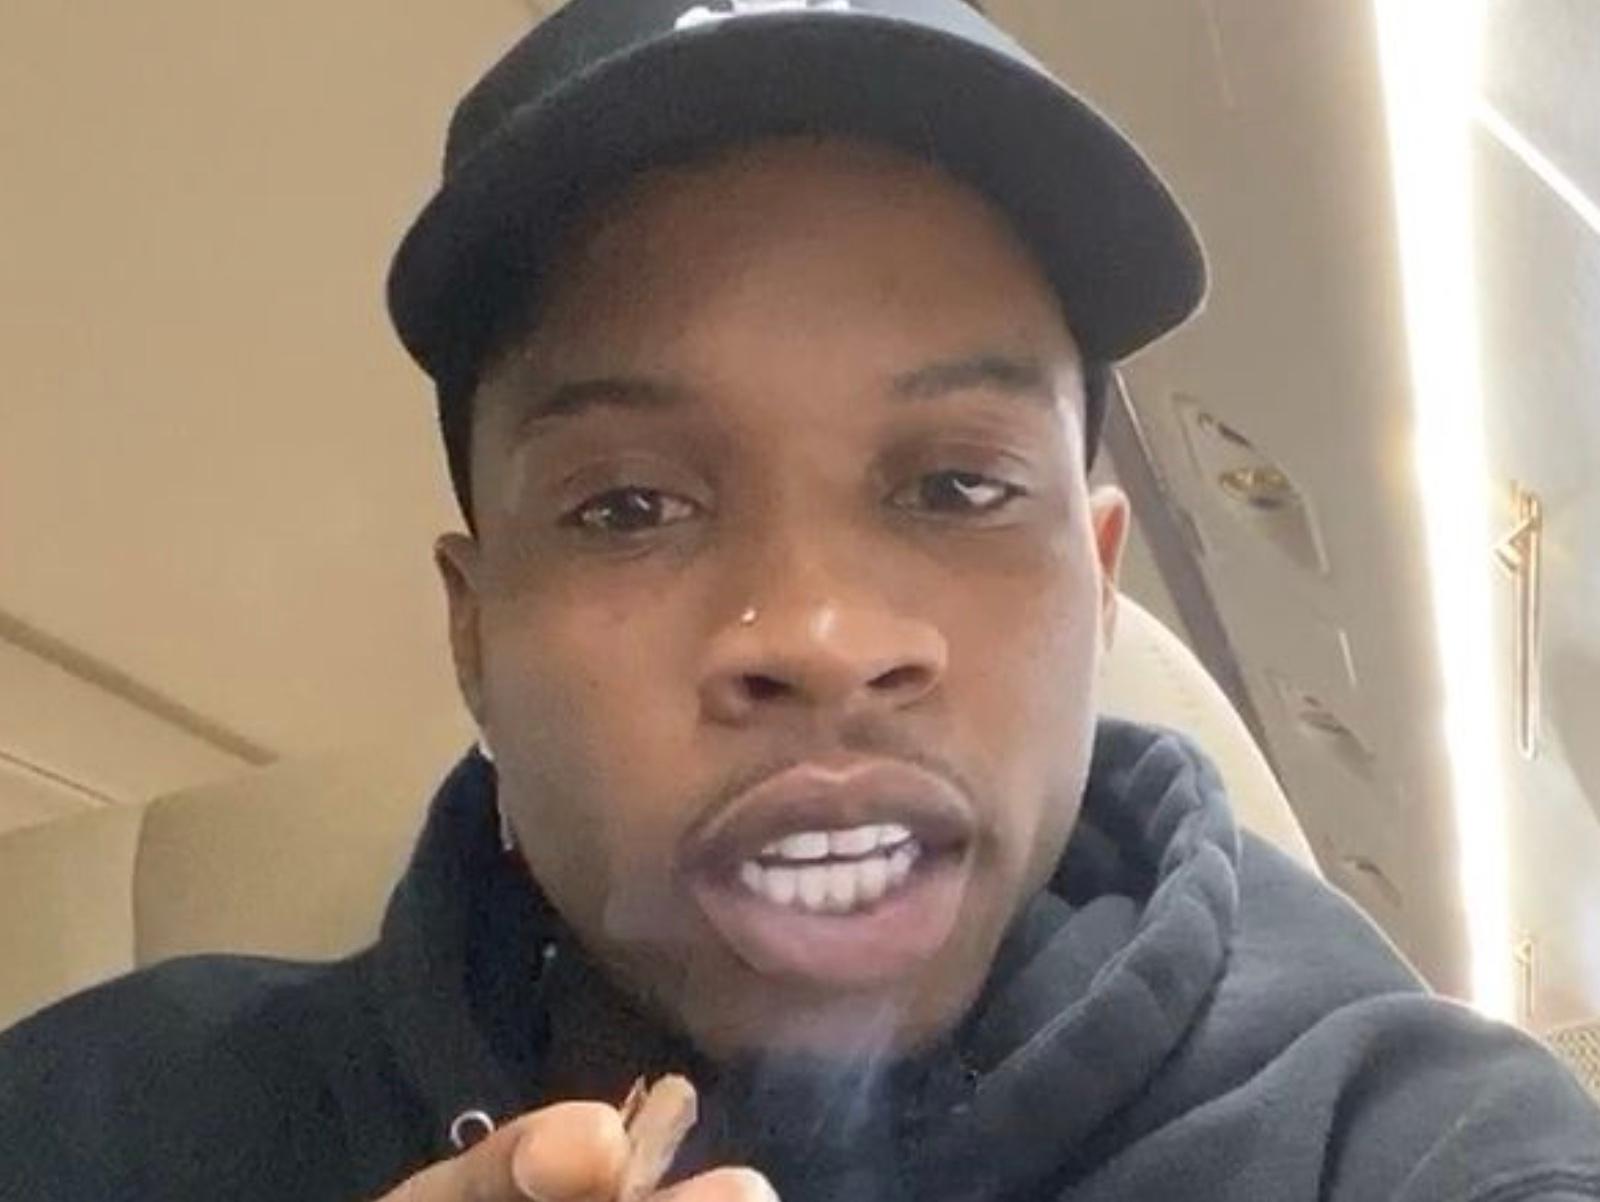 Tory Lanez plans to appeal sentence